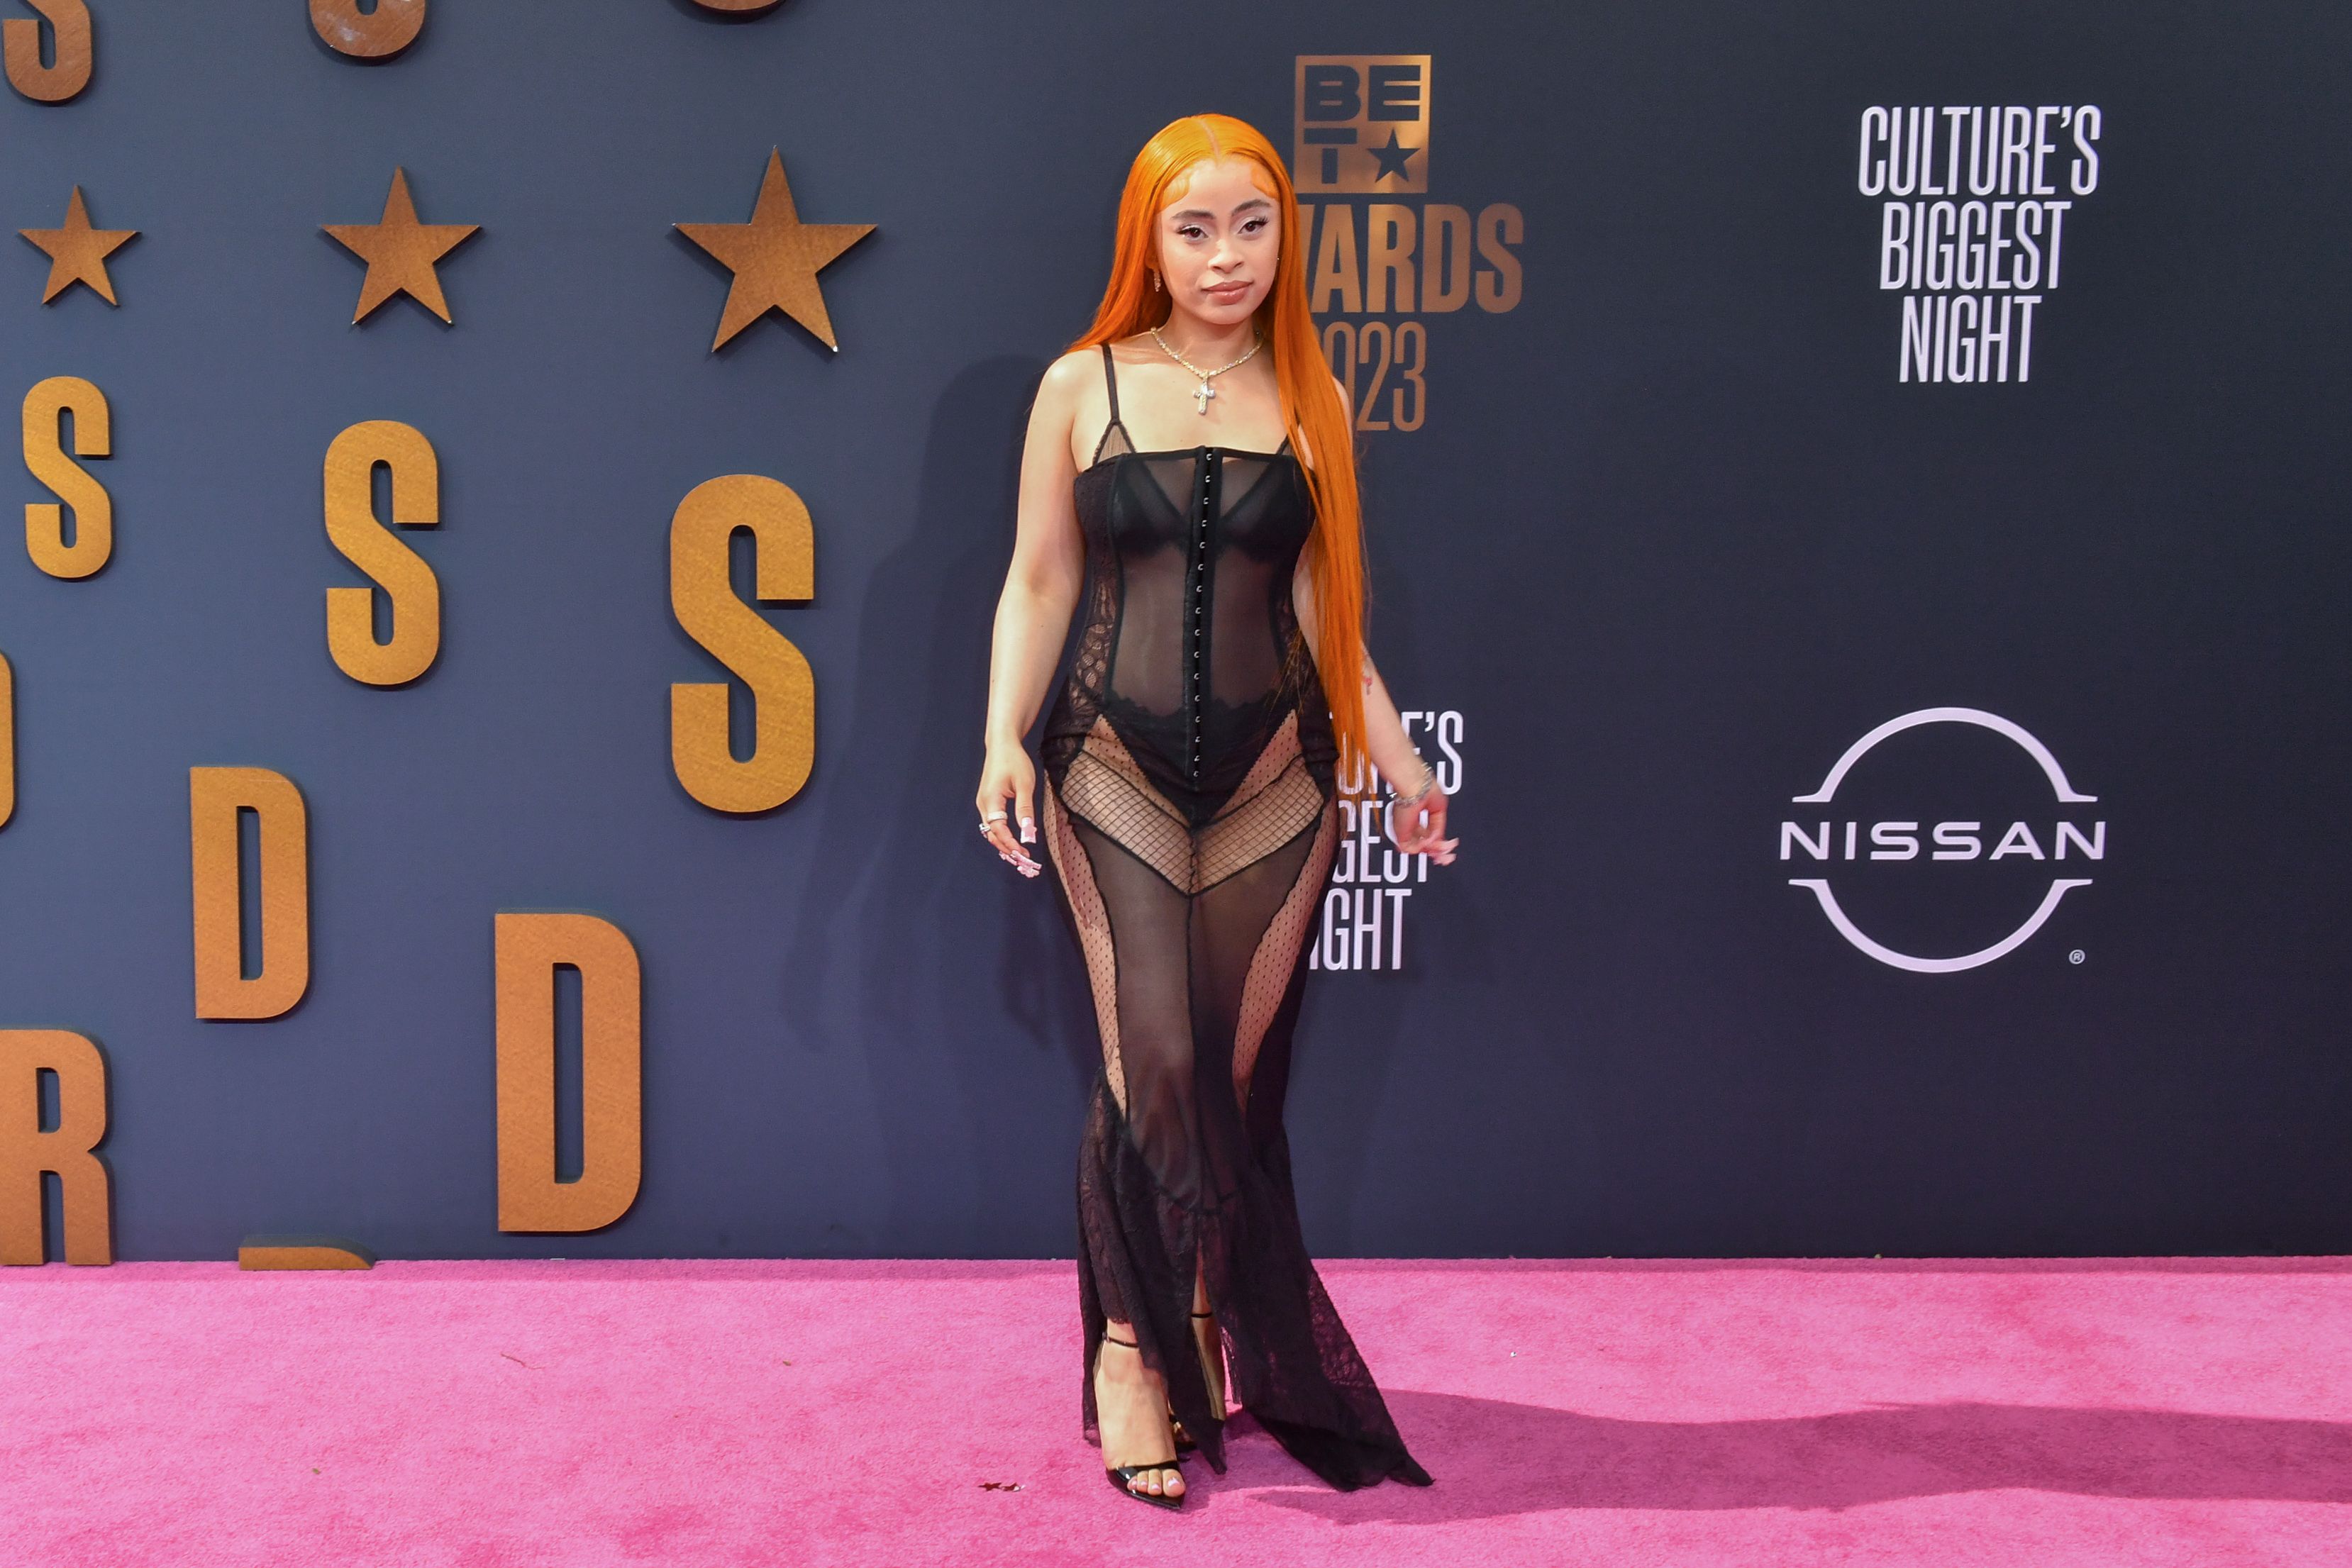 Ice Spice Slays at the BET Awards in See-Through Gown